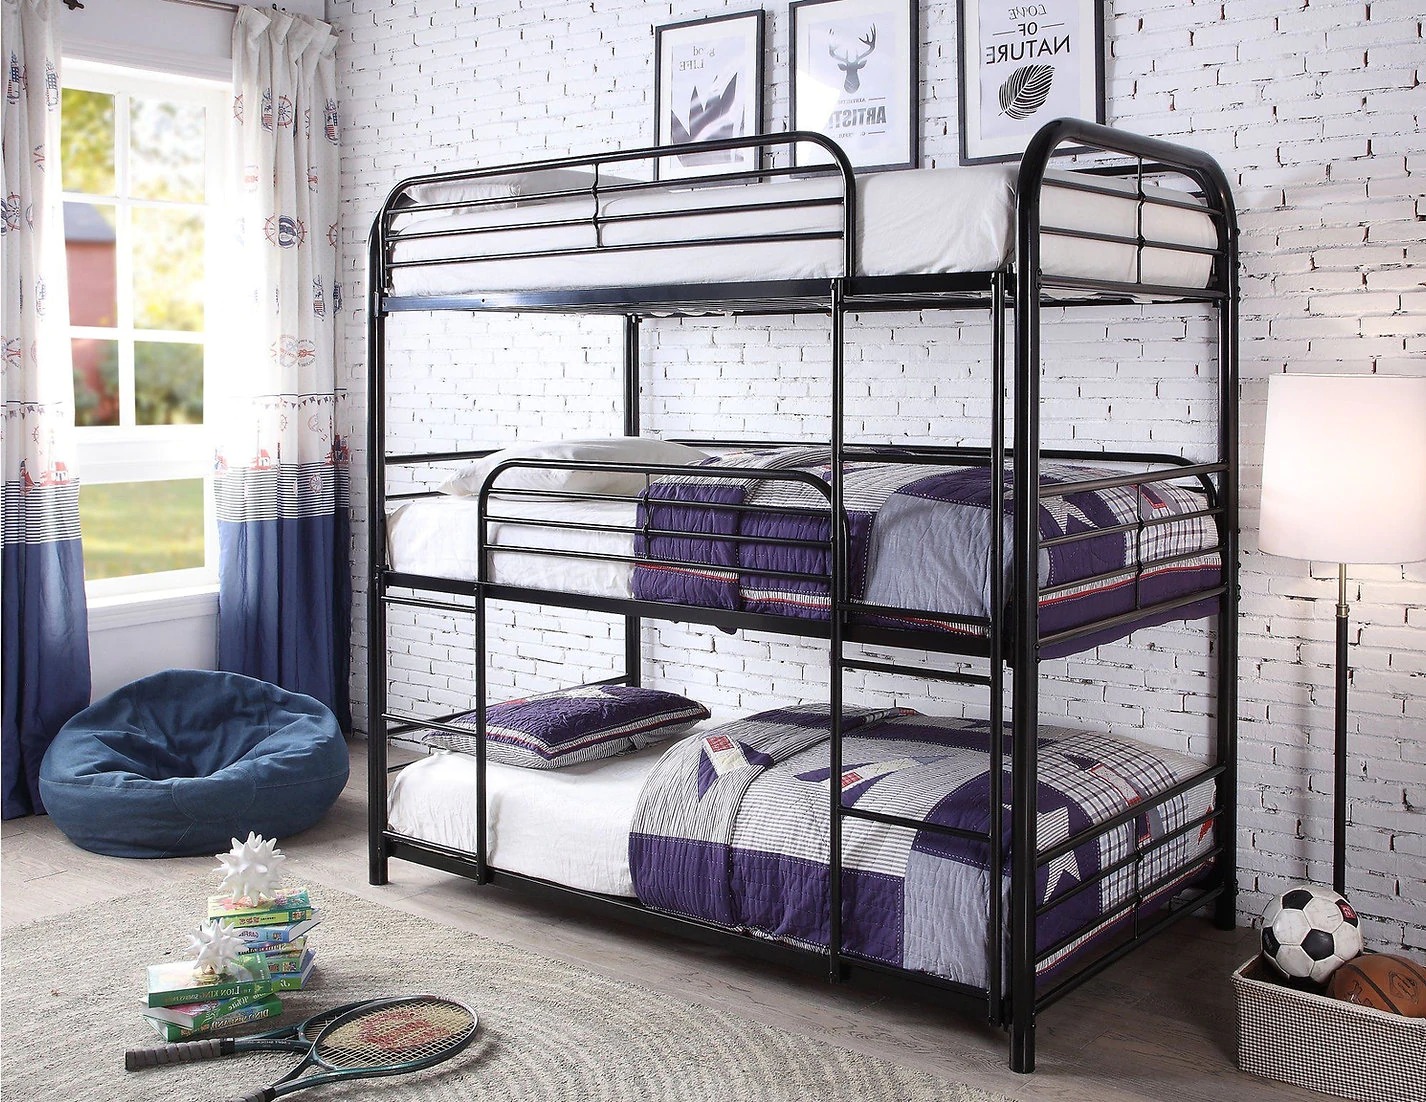 Things You Need To Know Before Buying Bunk Beds